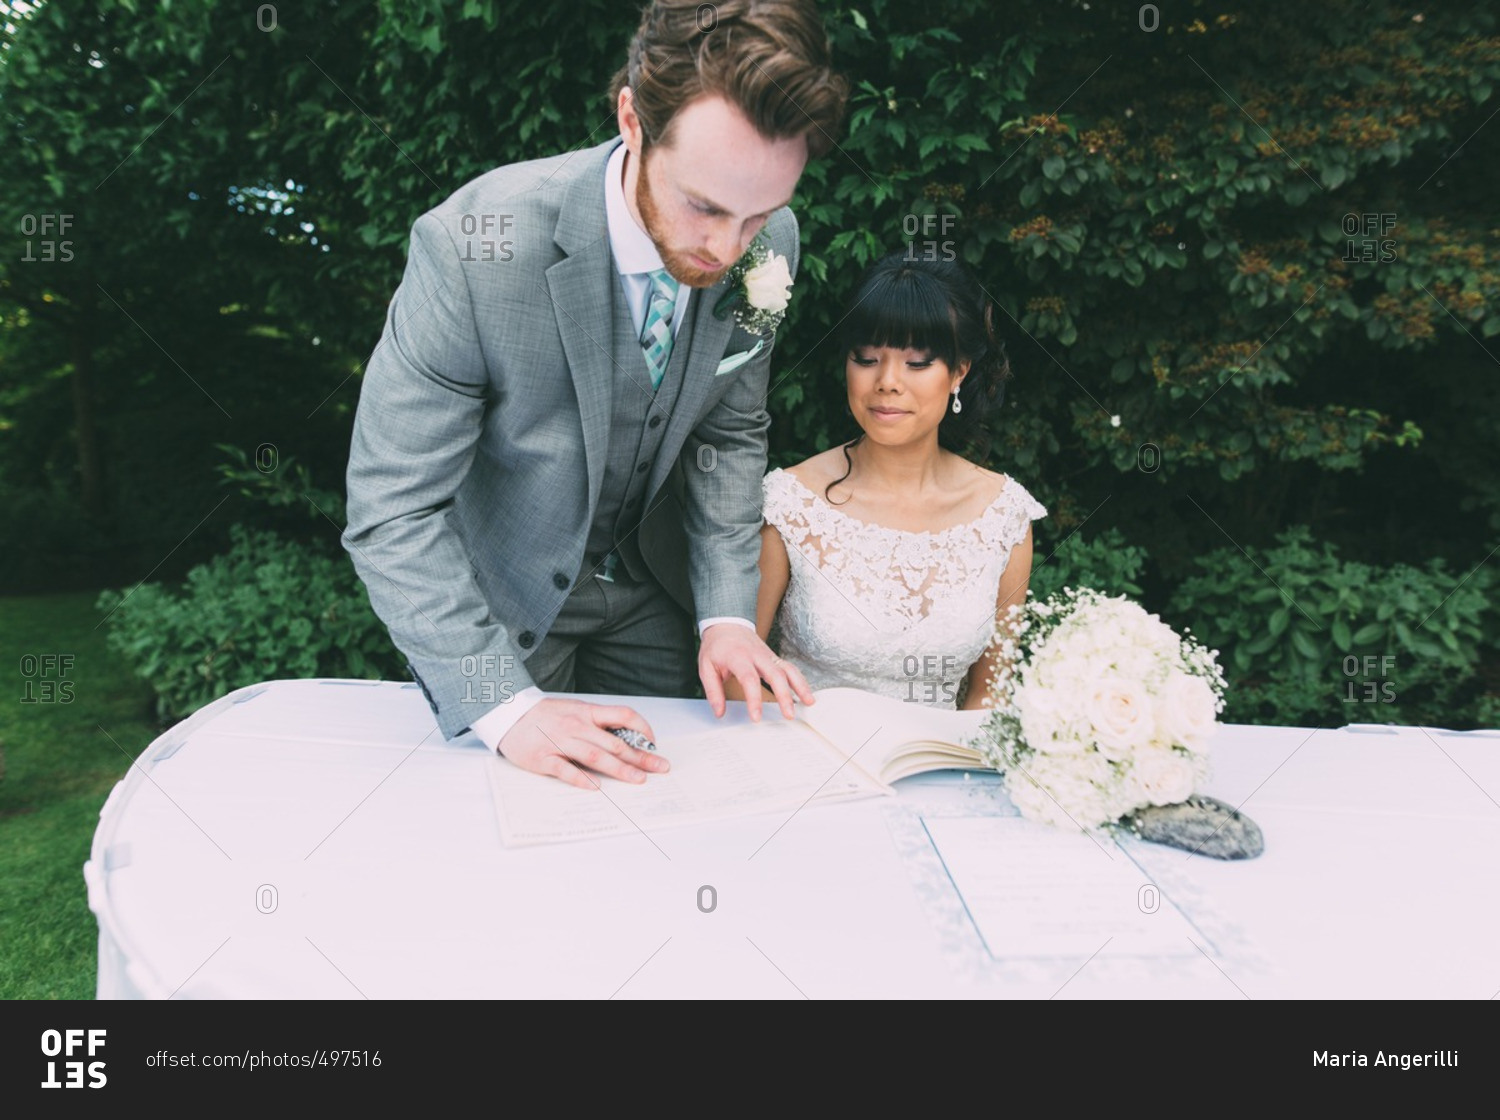 Newlywed couple signing the marriage certificate on their wedding day